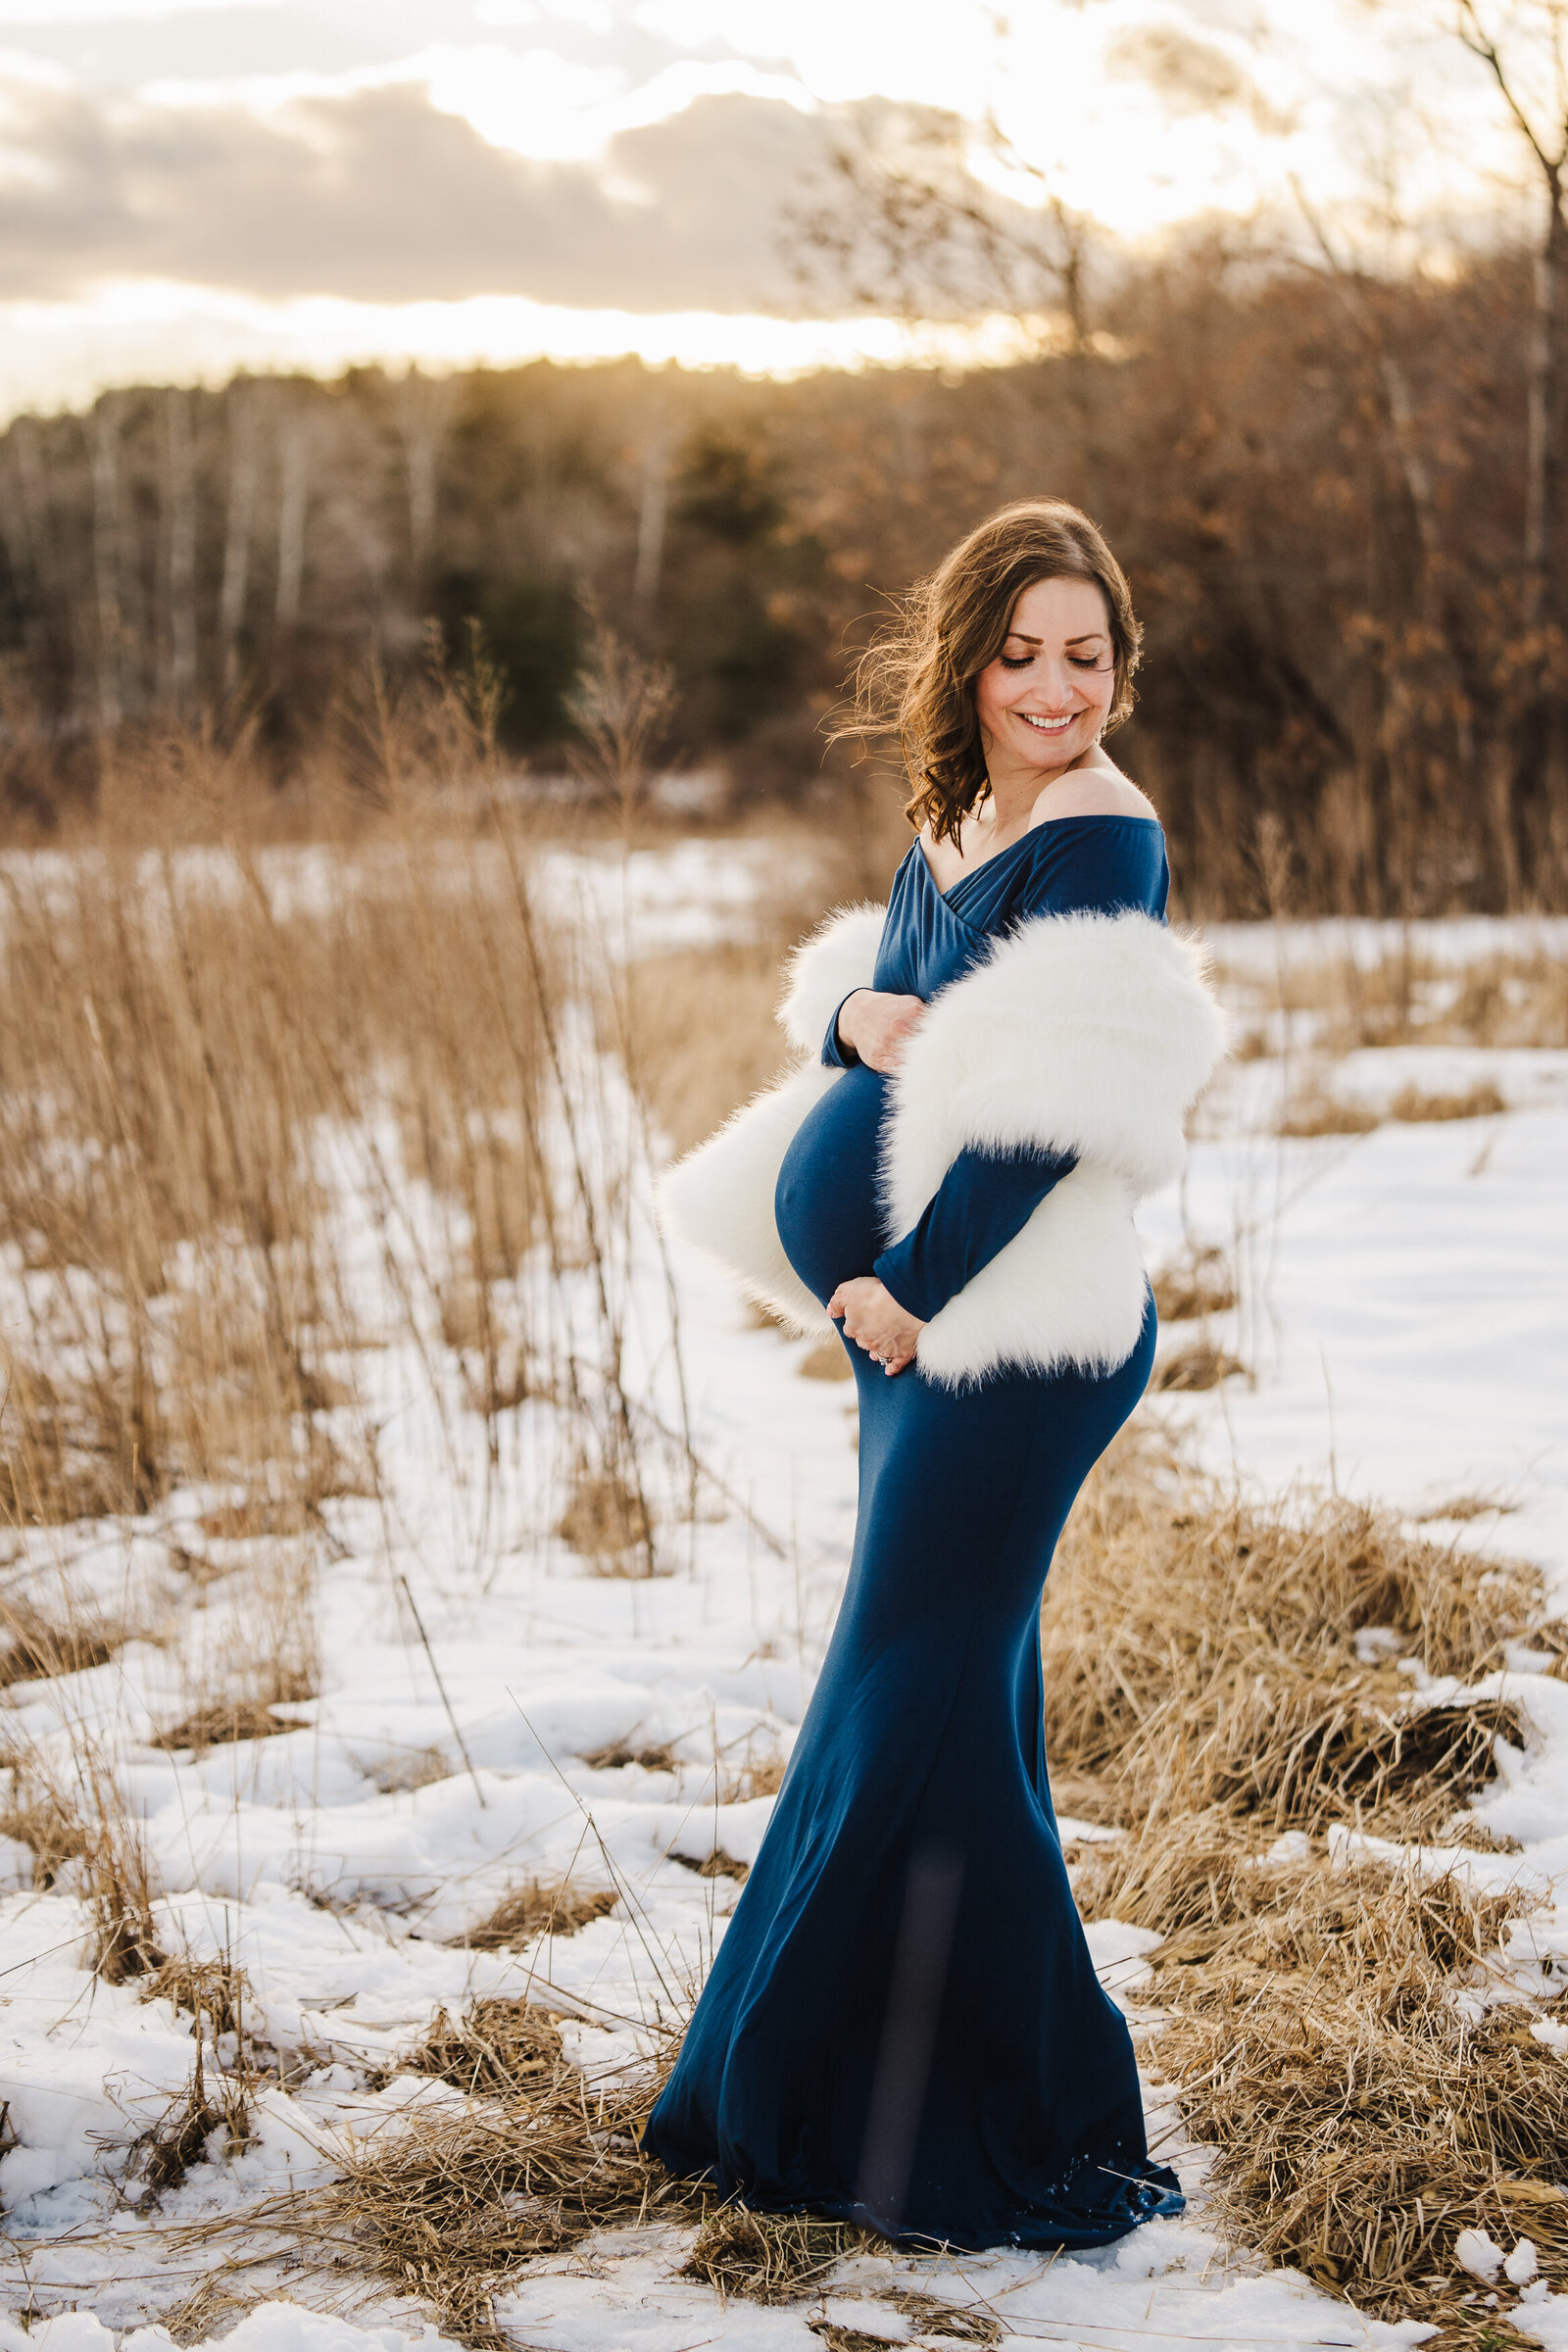 pregnant woman in blue dress stands in snowy field